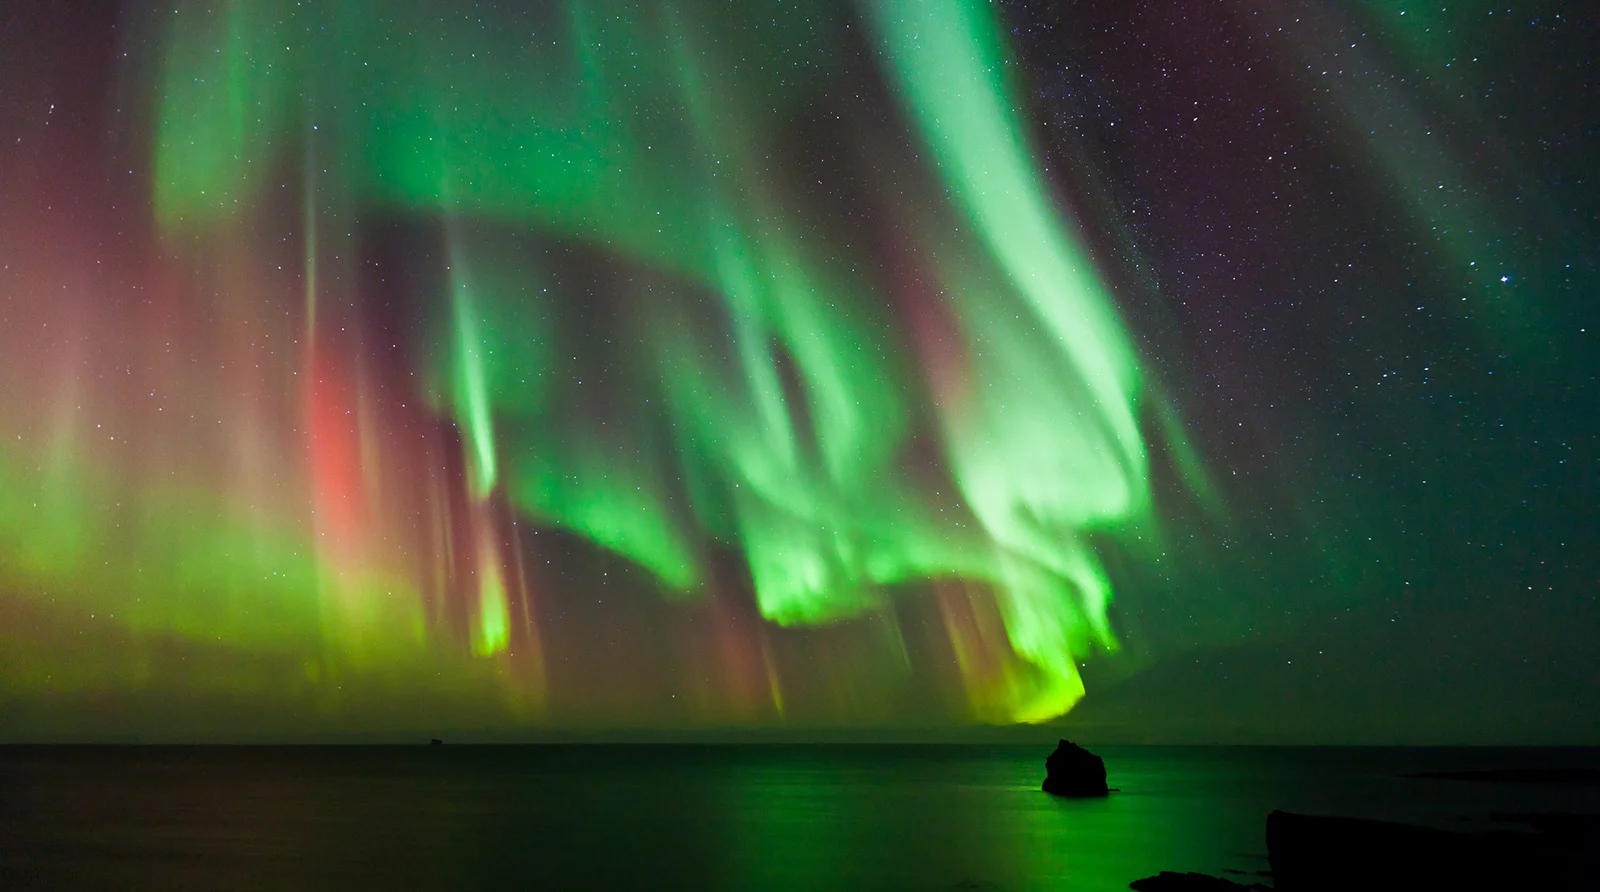 An intense northern lights display in Northern Norway